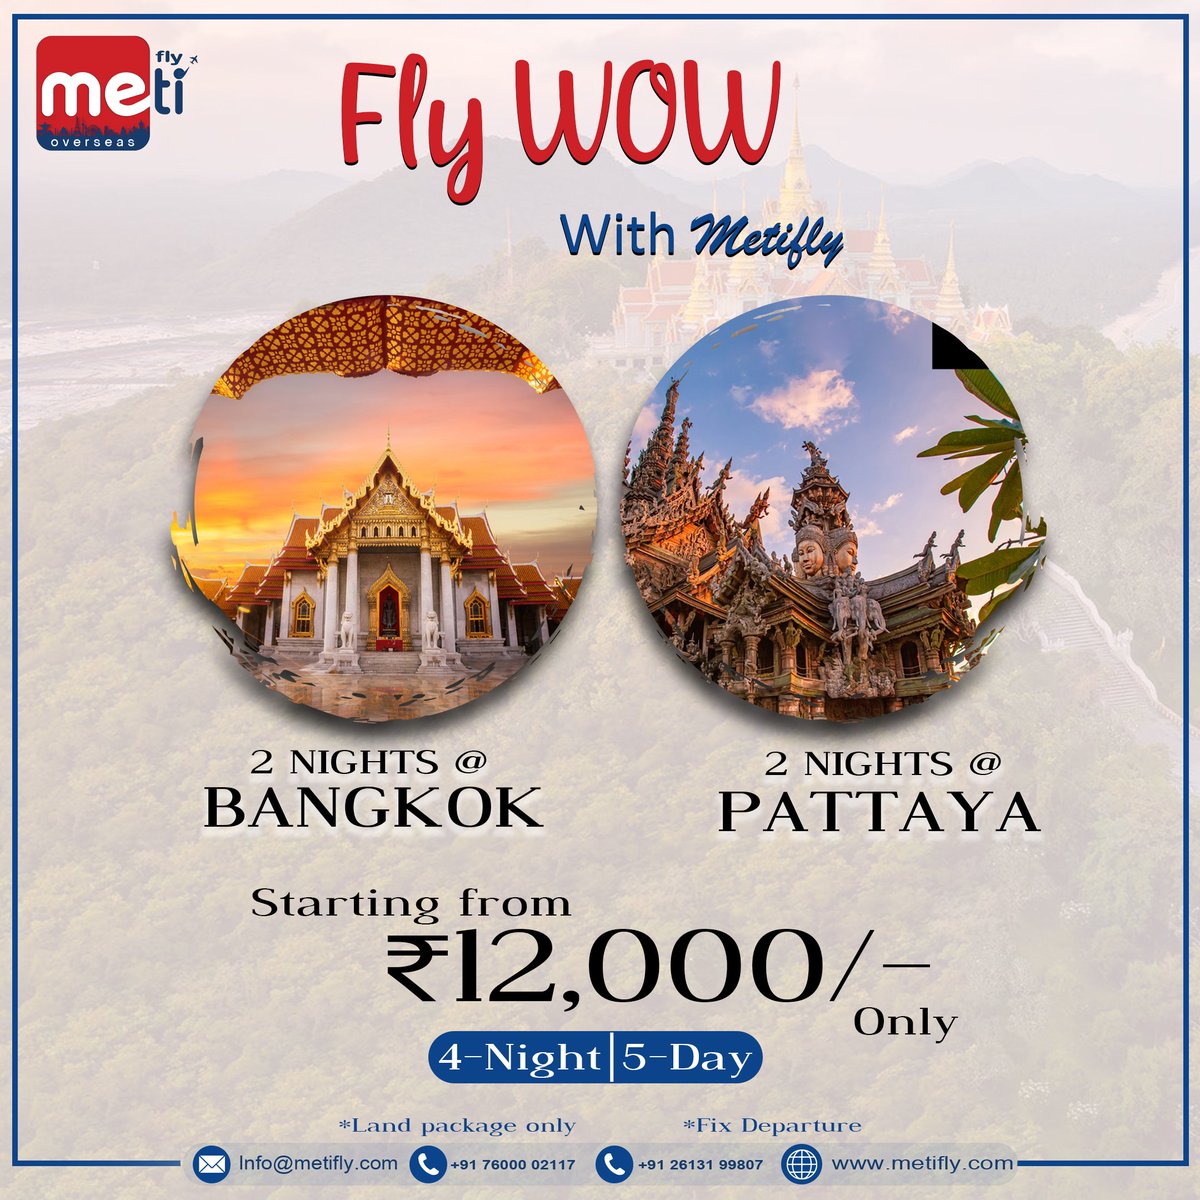 Jaw-Dropping Deal! 4 Nights-5 Days in Bangkok, starting at ₹12,000/- with Metifly.

Call Us to Explore
+91 76000 02117. 
.
Follow Us...

_Facebook_

facebook.com/Metiflyy?mibex…

_Instagram_

instagram.com/metiflyy?igshi…

#unbelievabledeal #deal #bangkok #bangkoktourism #pataya #metifly